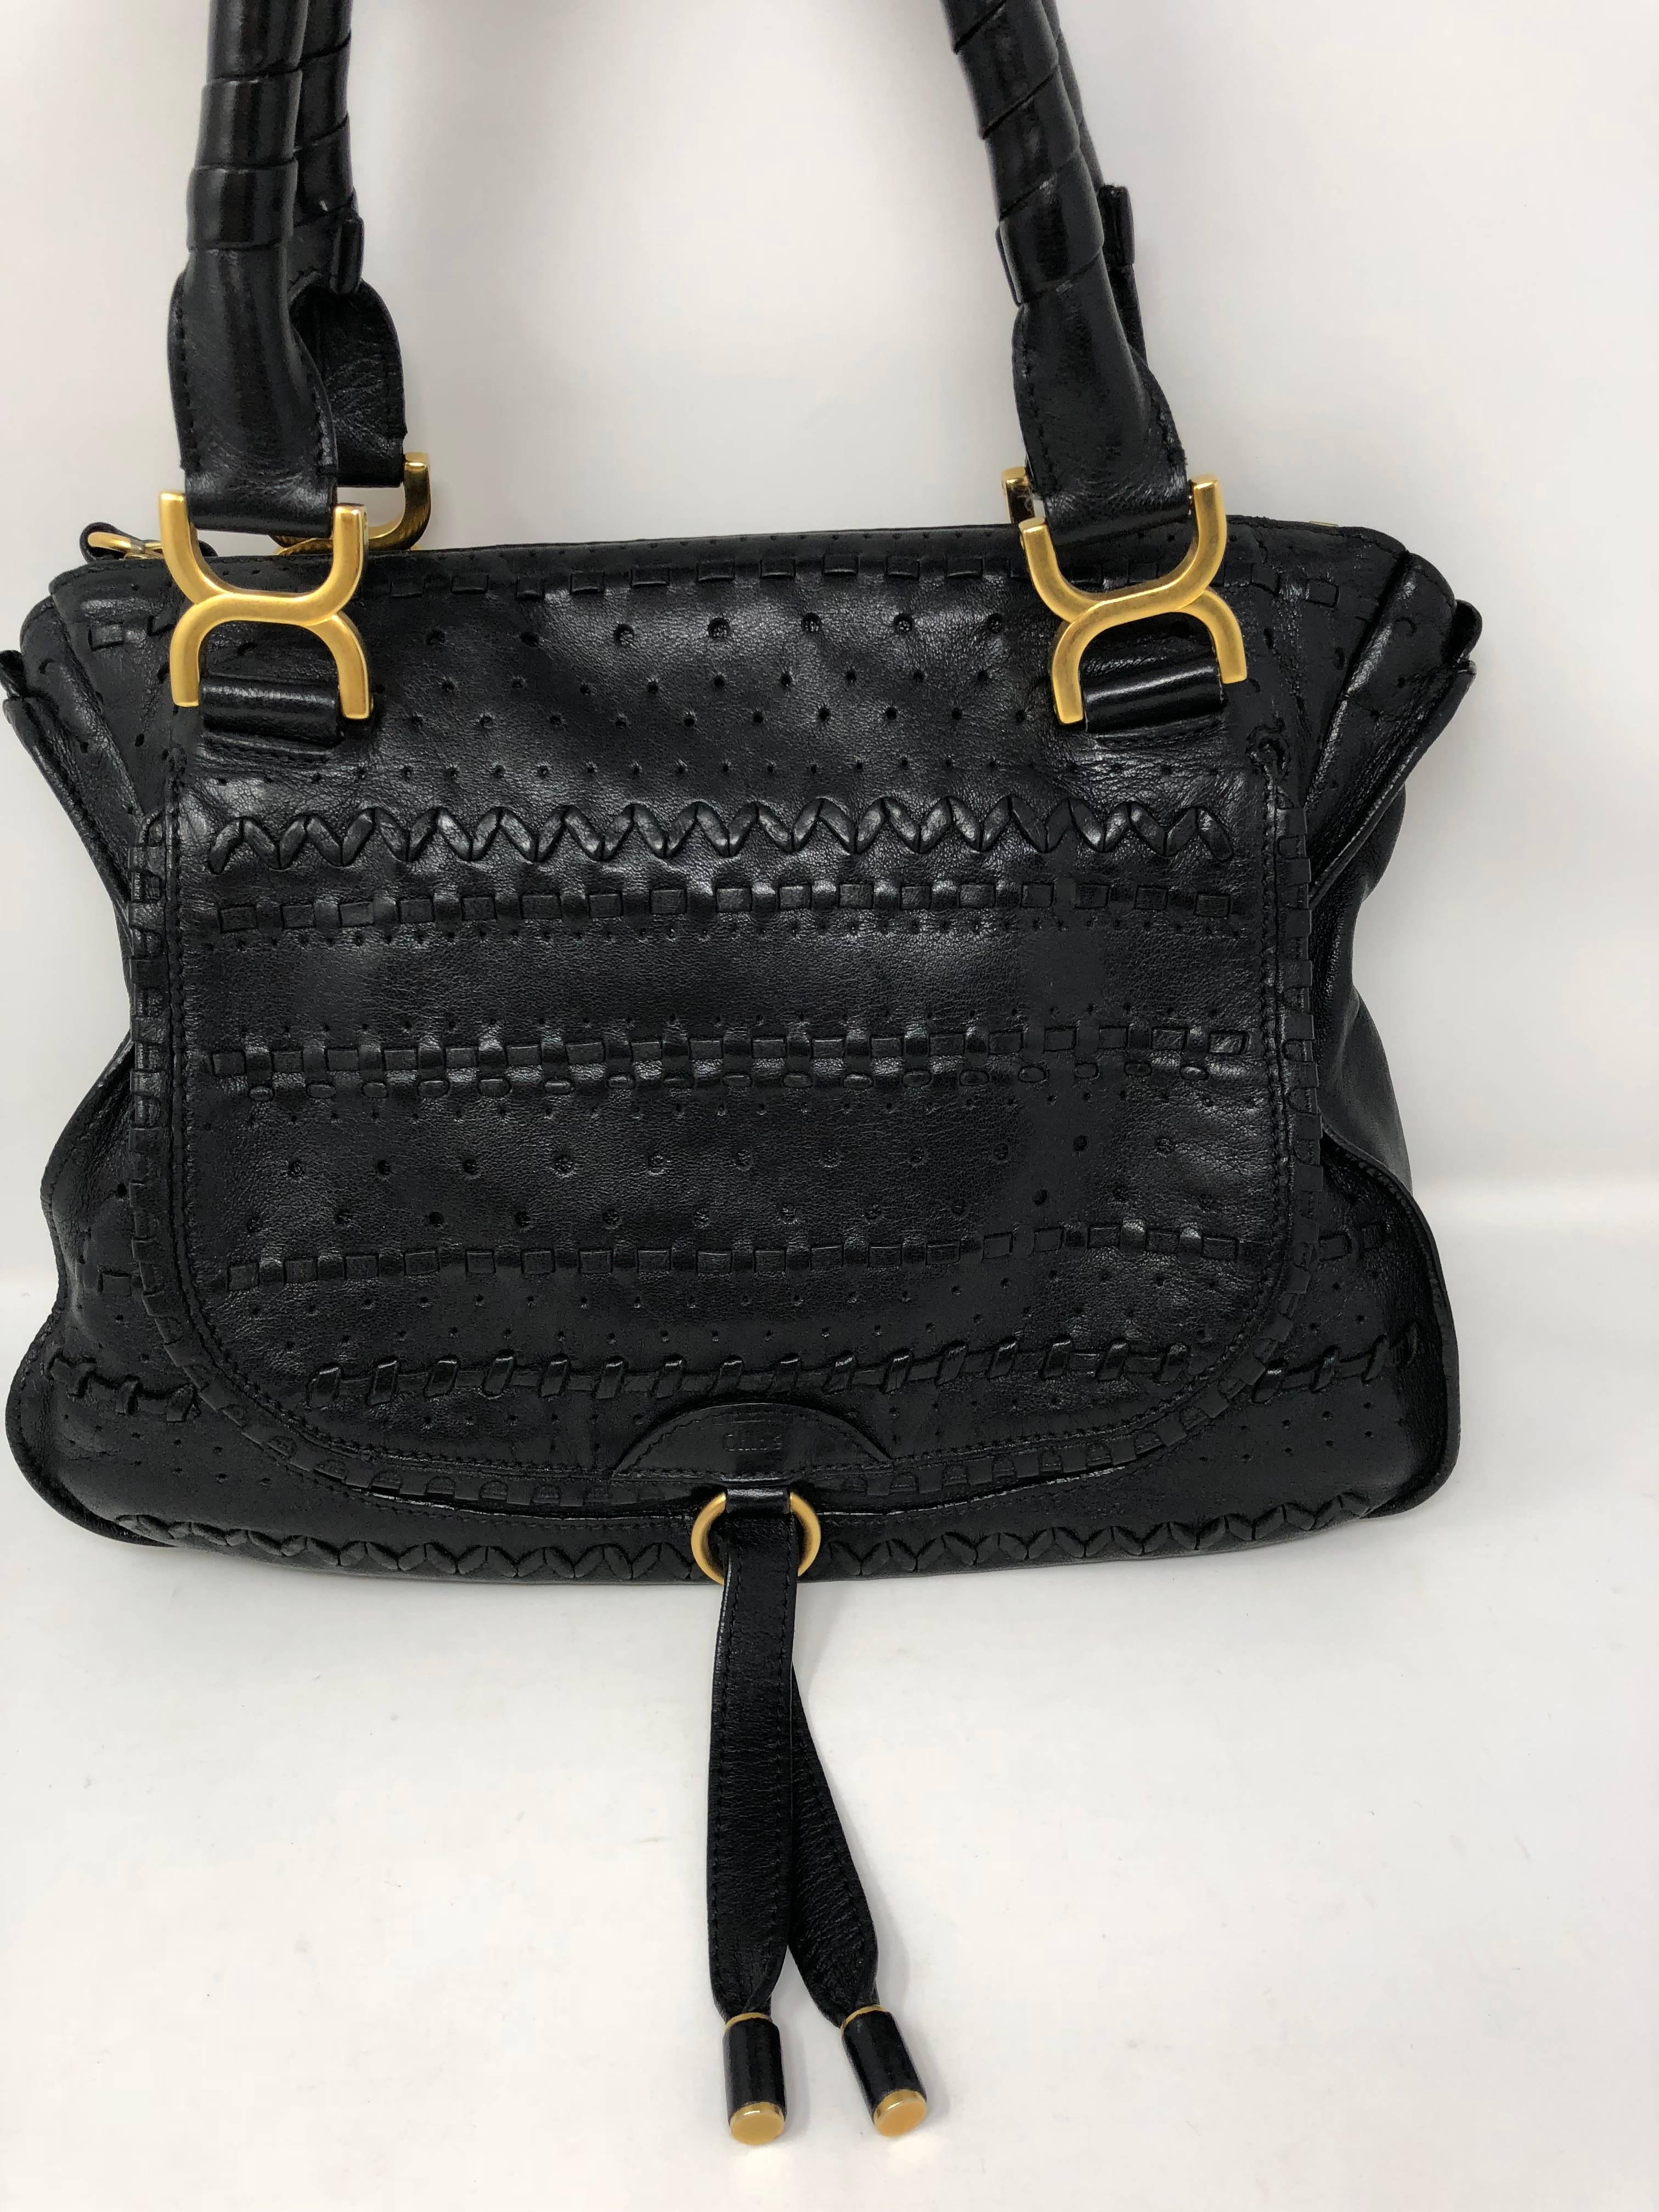 Chloe Embroidered Marcie Black Hobo Bag. Beautiful and soft lambskin leather with special embroidery finish. A unique style bag. 